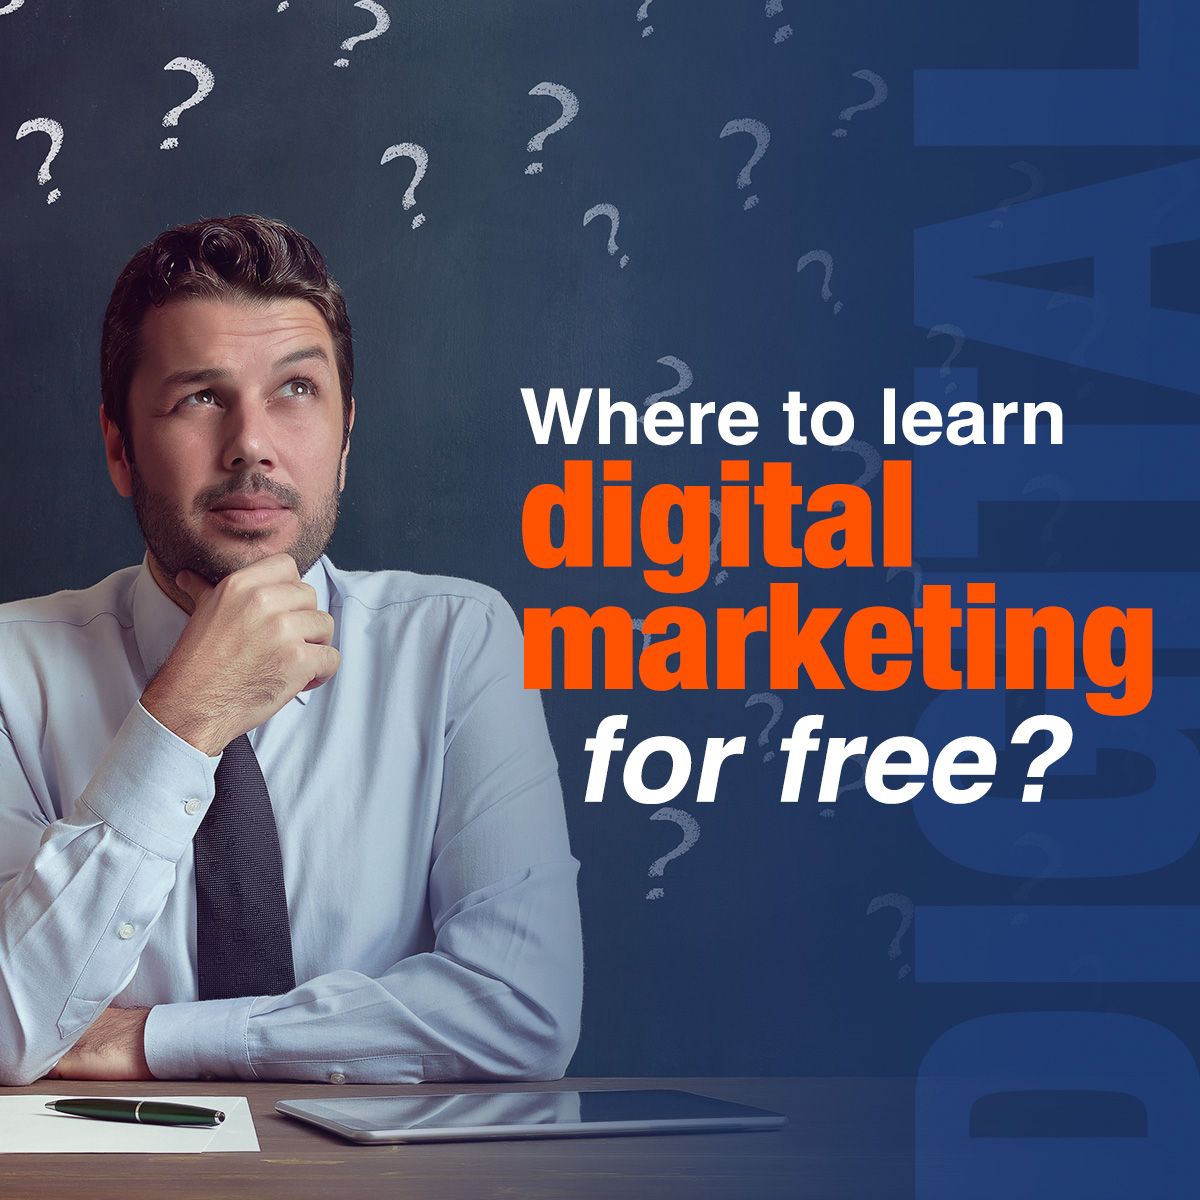 Where to learn digital marketing for free?